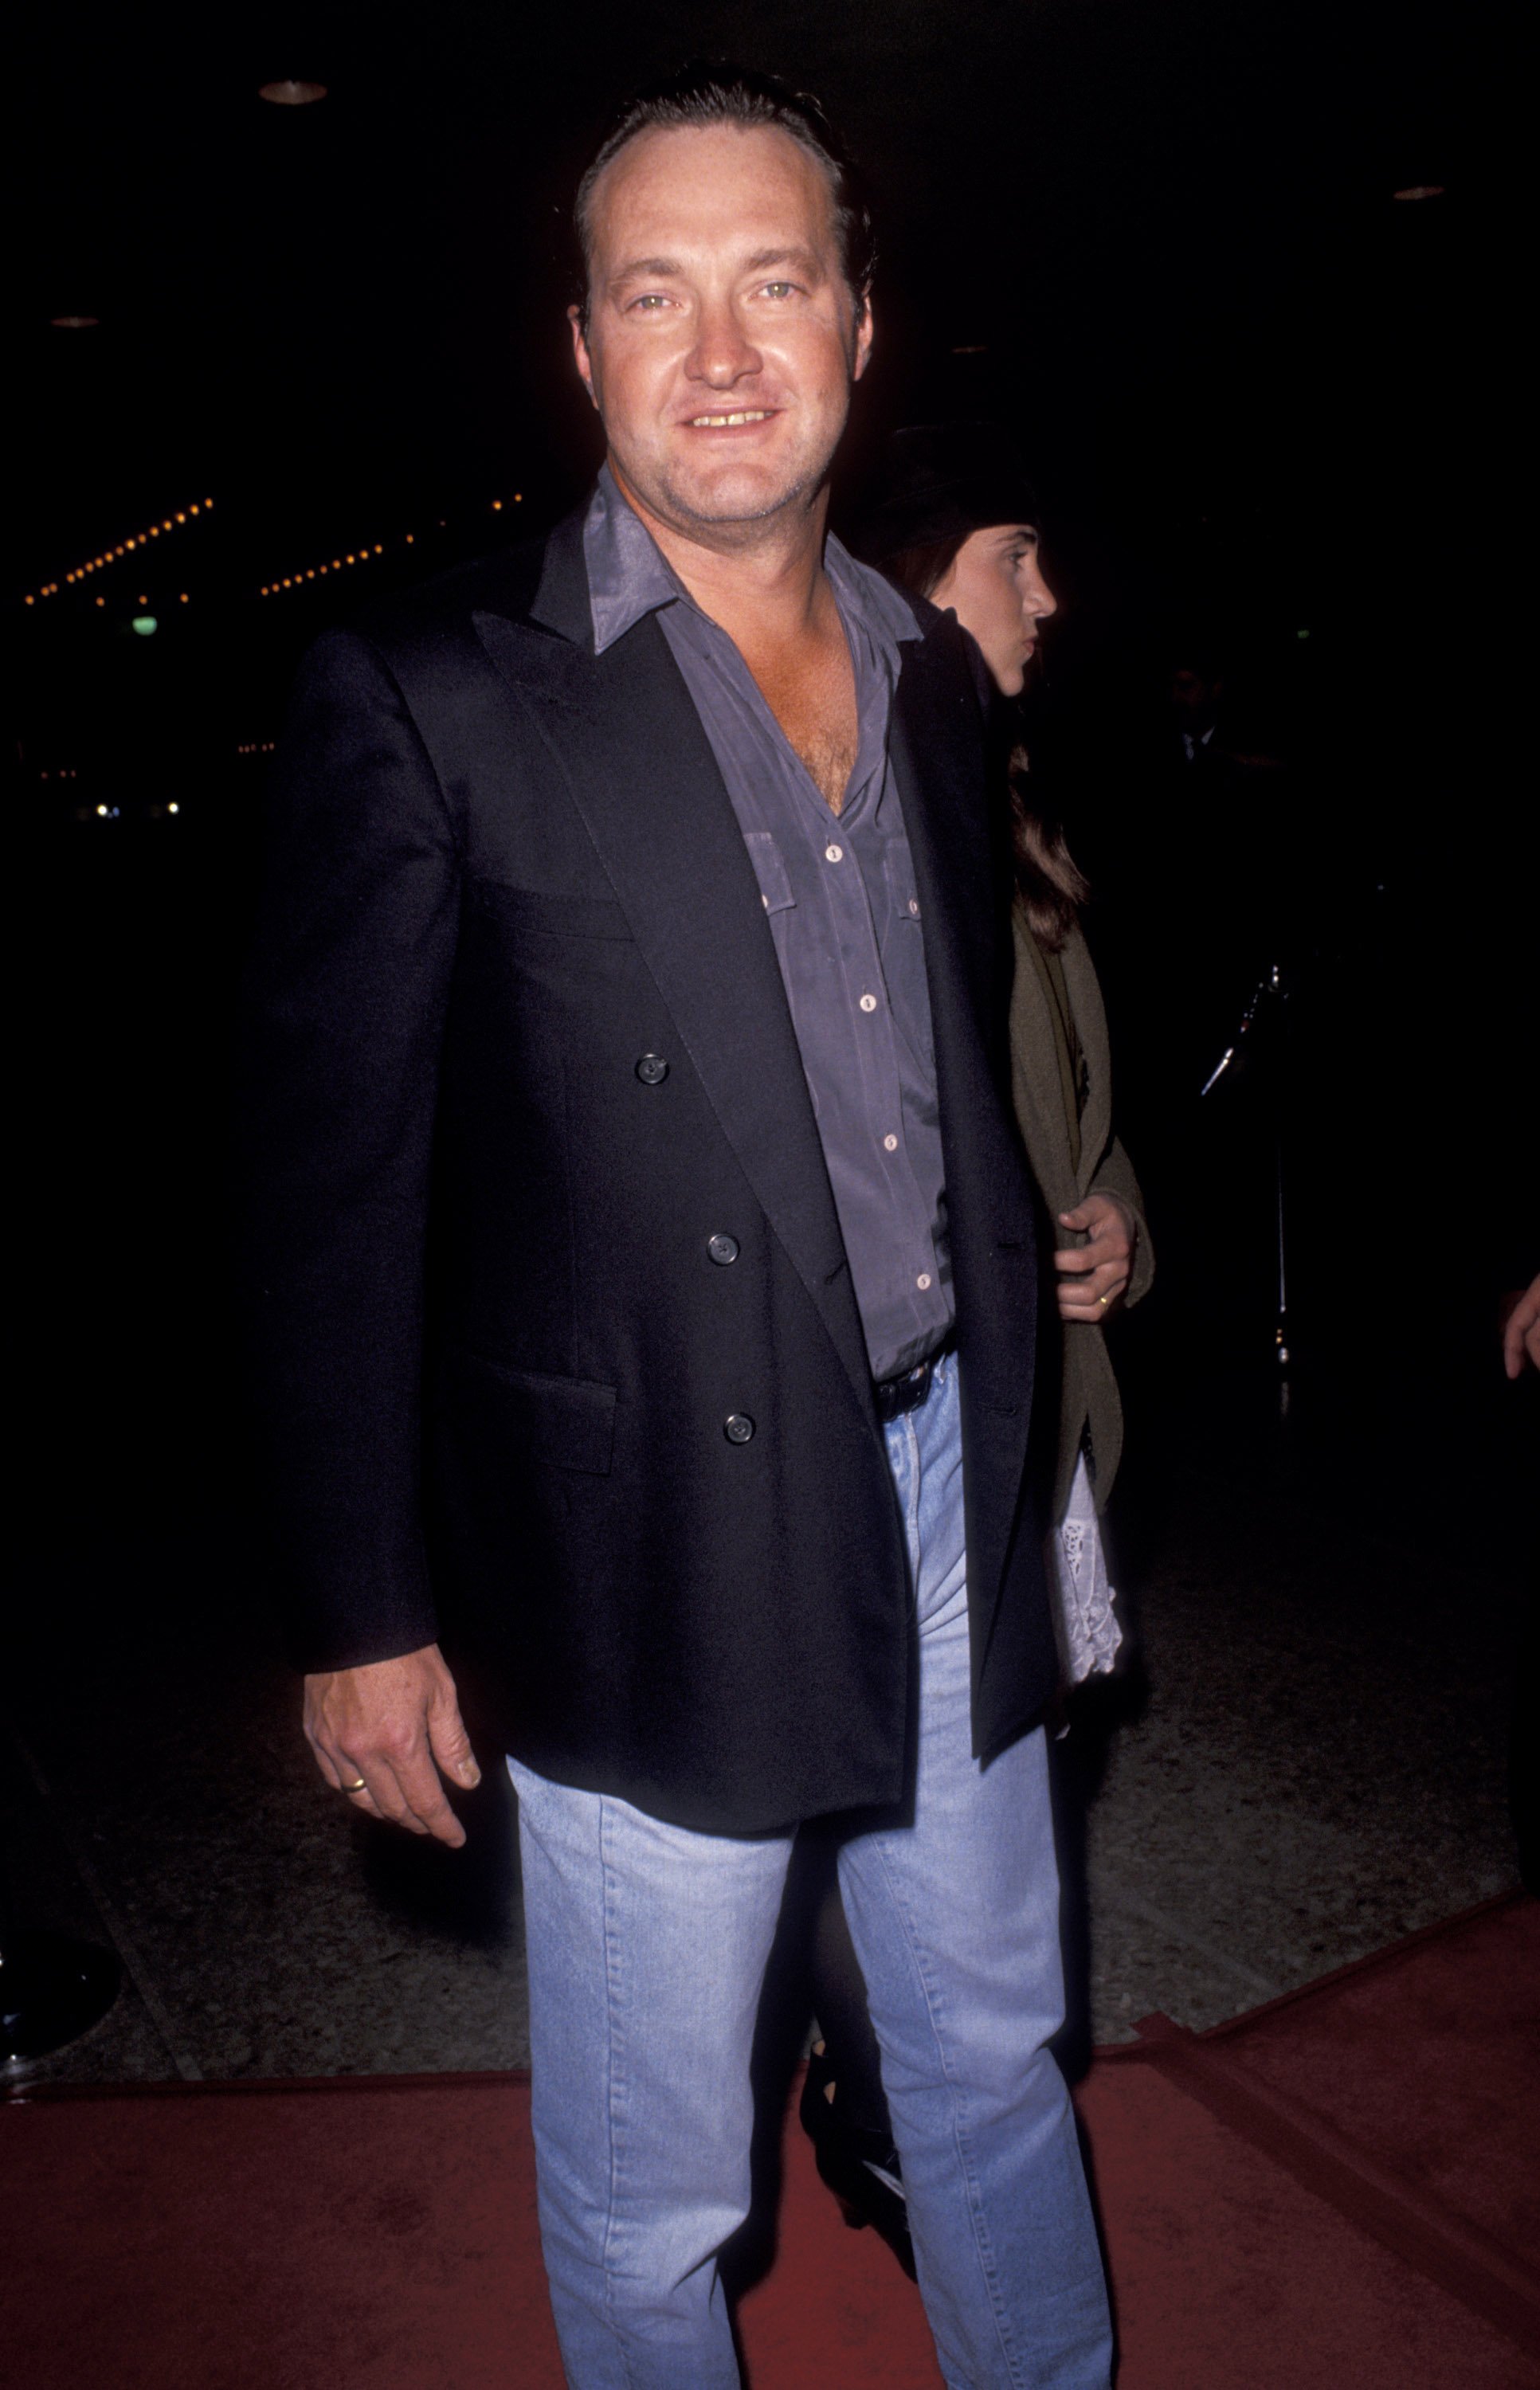 Randy Quaid during "Come See The Paradise" Los Angeles premiere on December 17, 1990, in Century City, California | Source: Getty Images